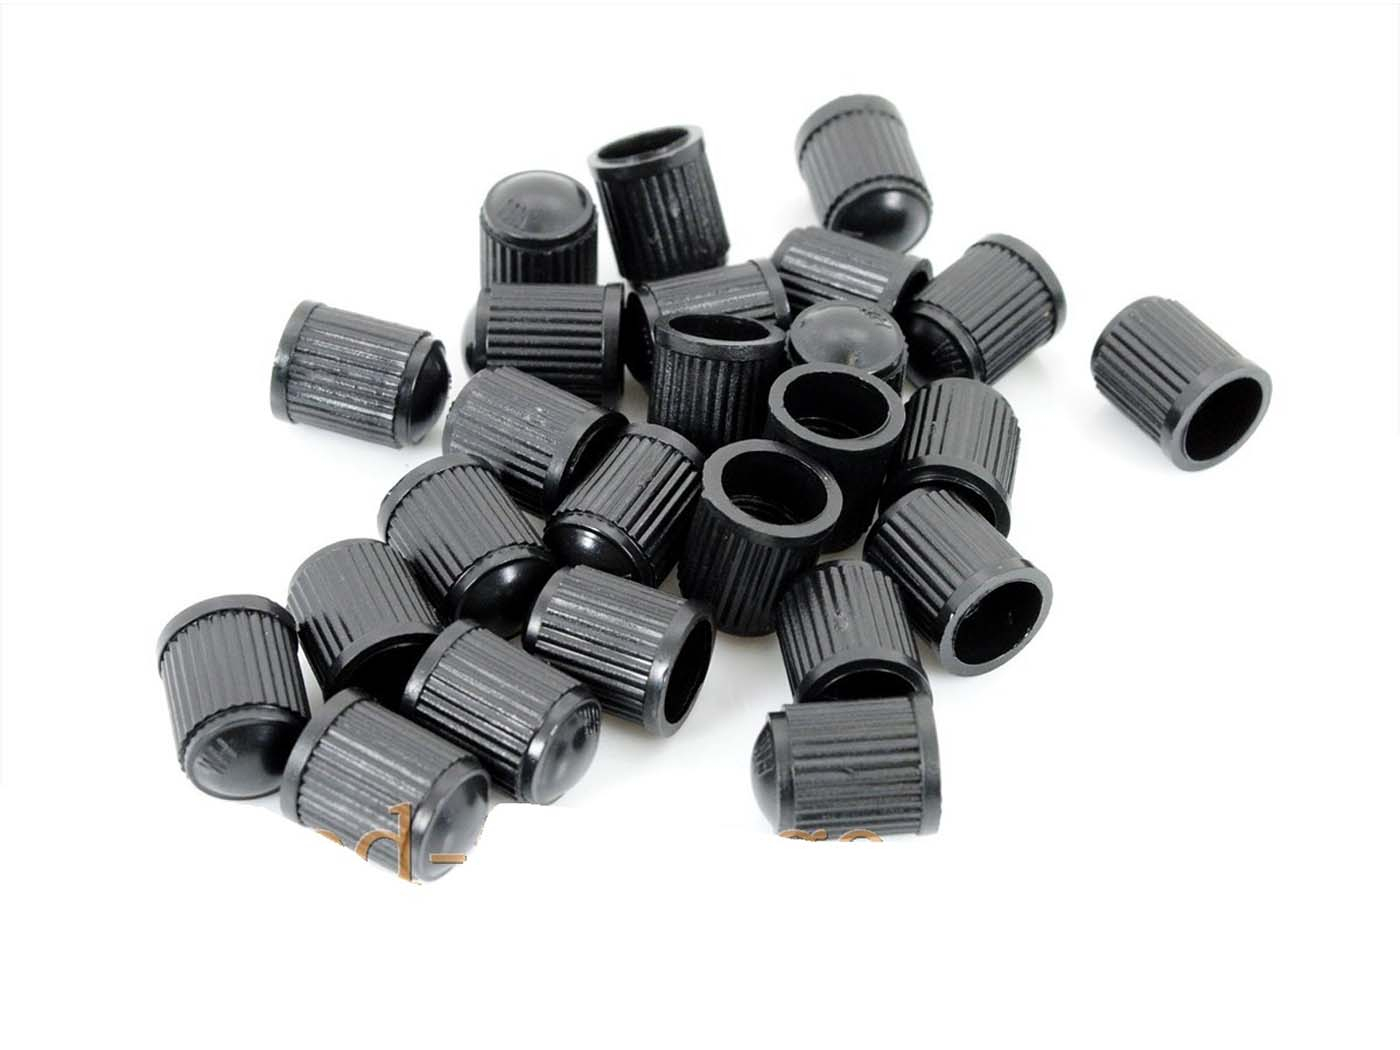 Valve Caps 25-pack For Moped Scooter